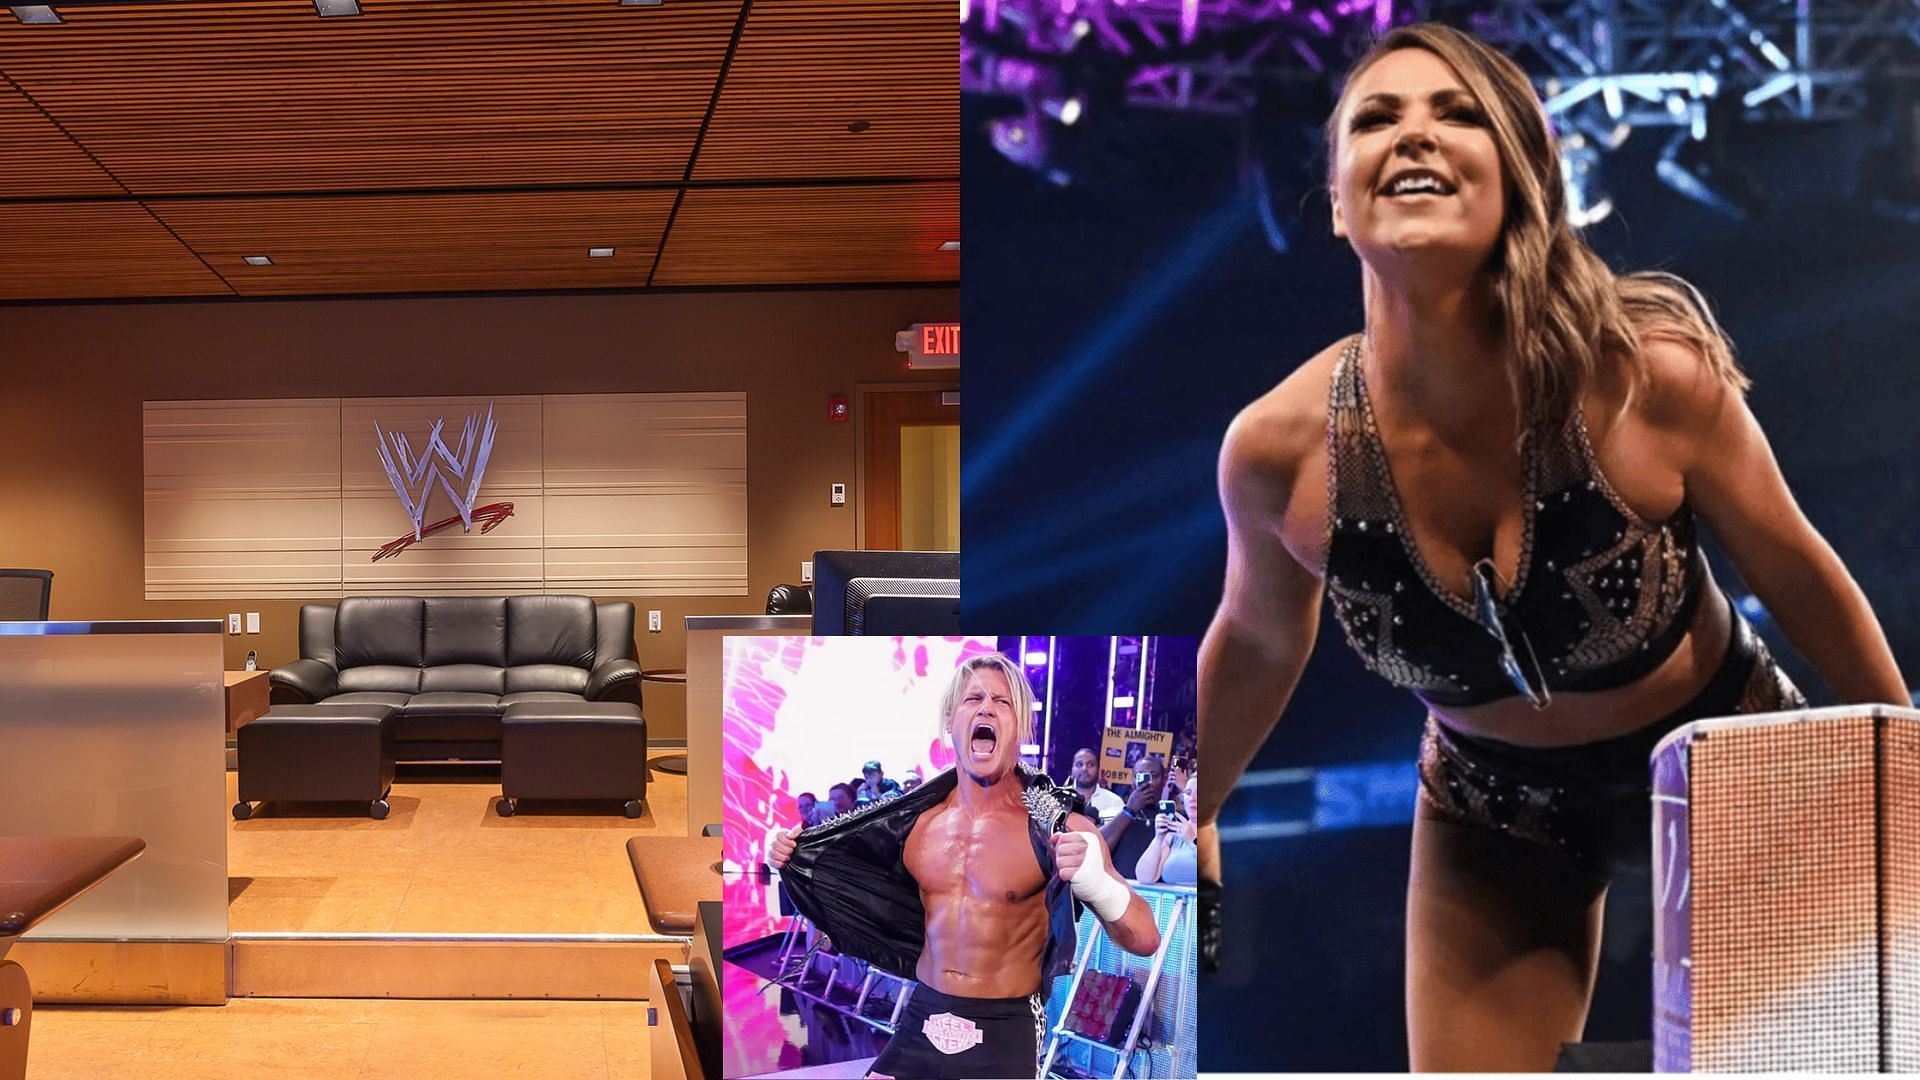 Emma and Dolph Ziggler are among two of the stars released from the company